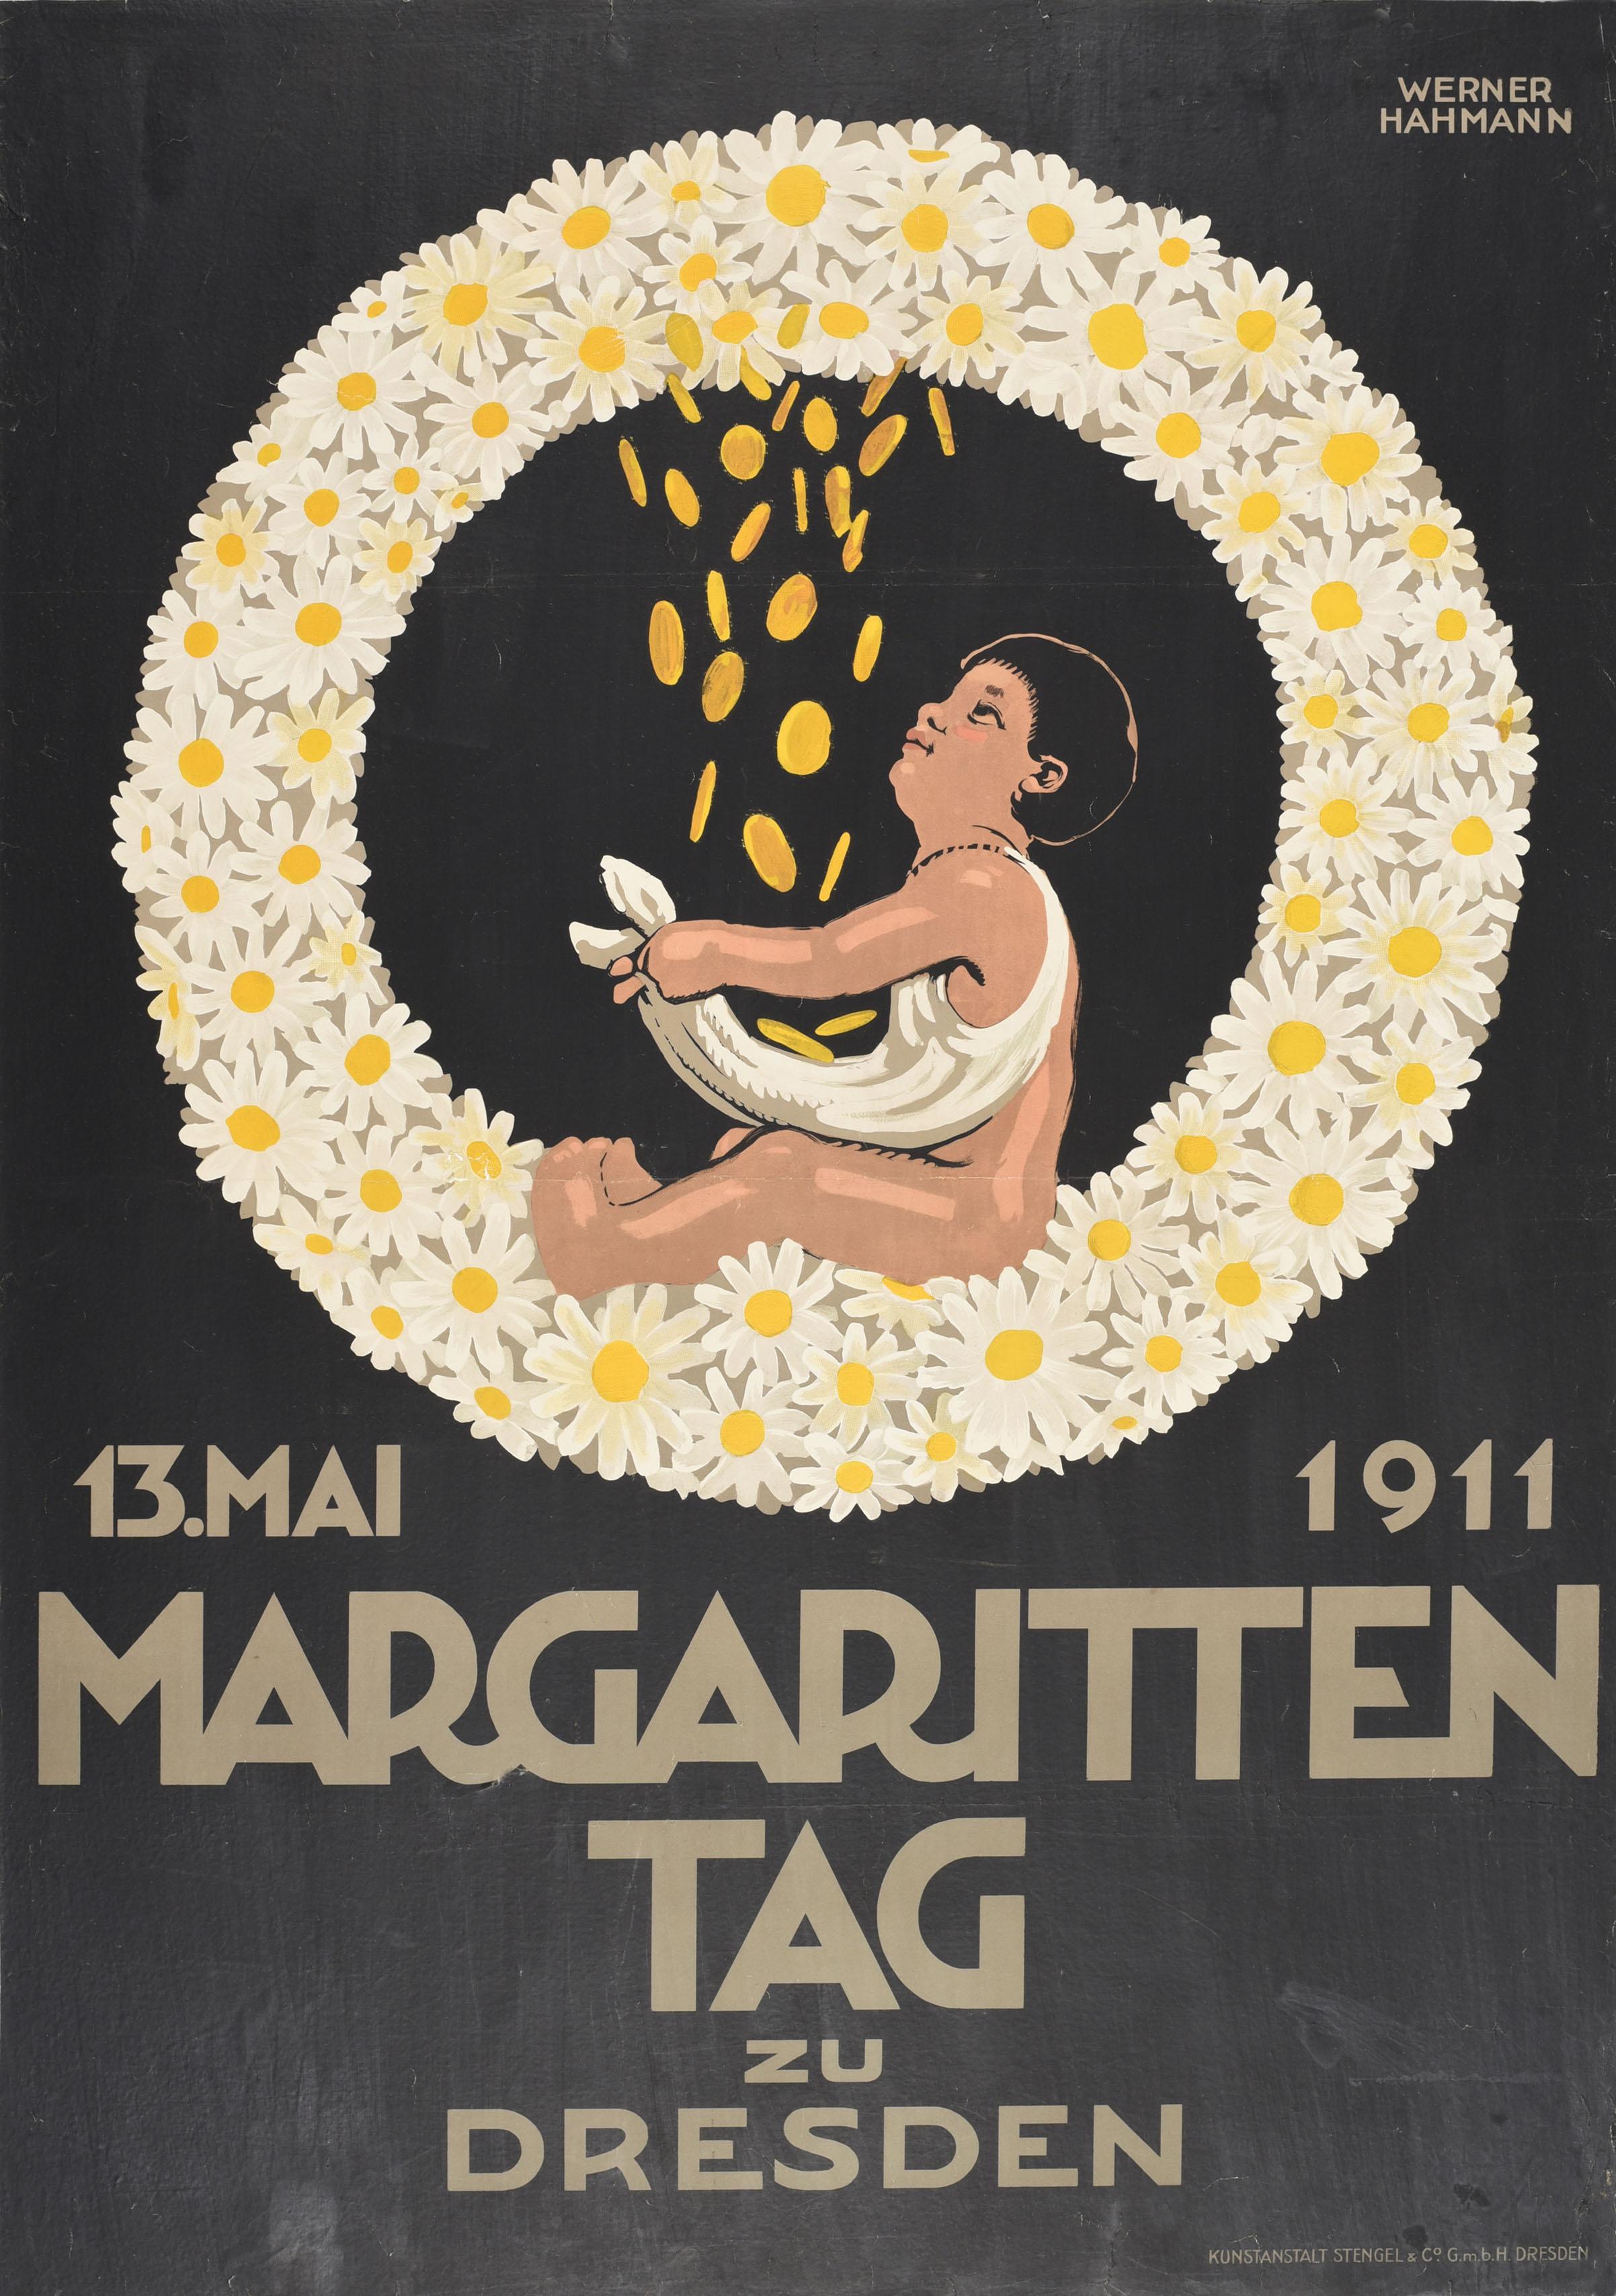 Unknown Print - Original Antique Poster Margaritten Tag Dresden Daisy Flowers Child Charity Day